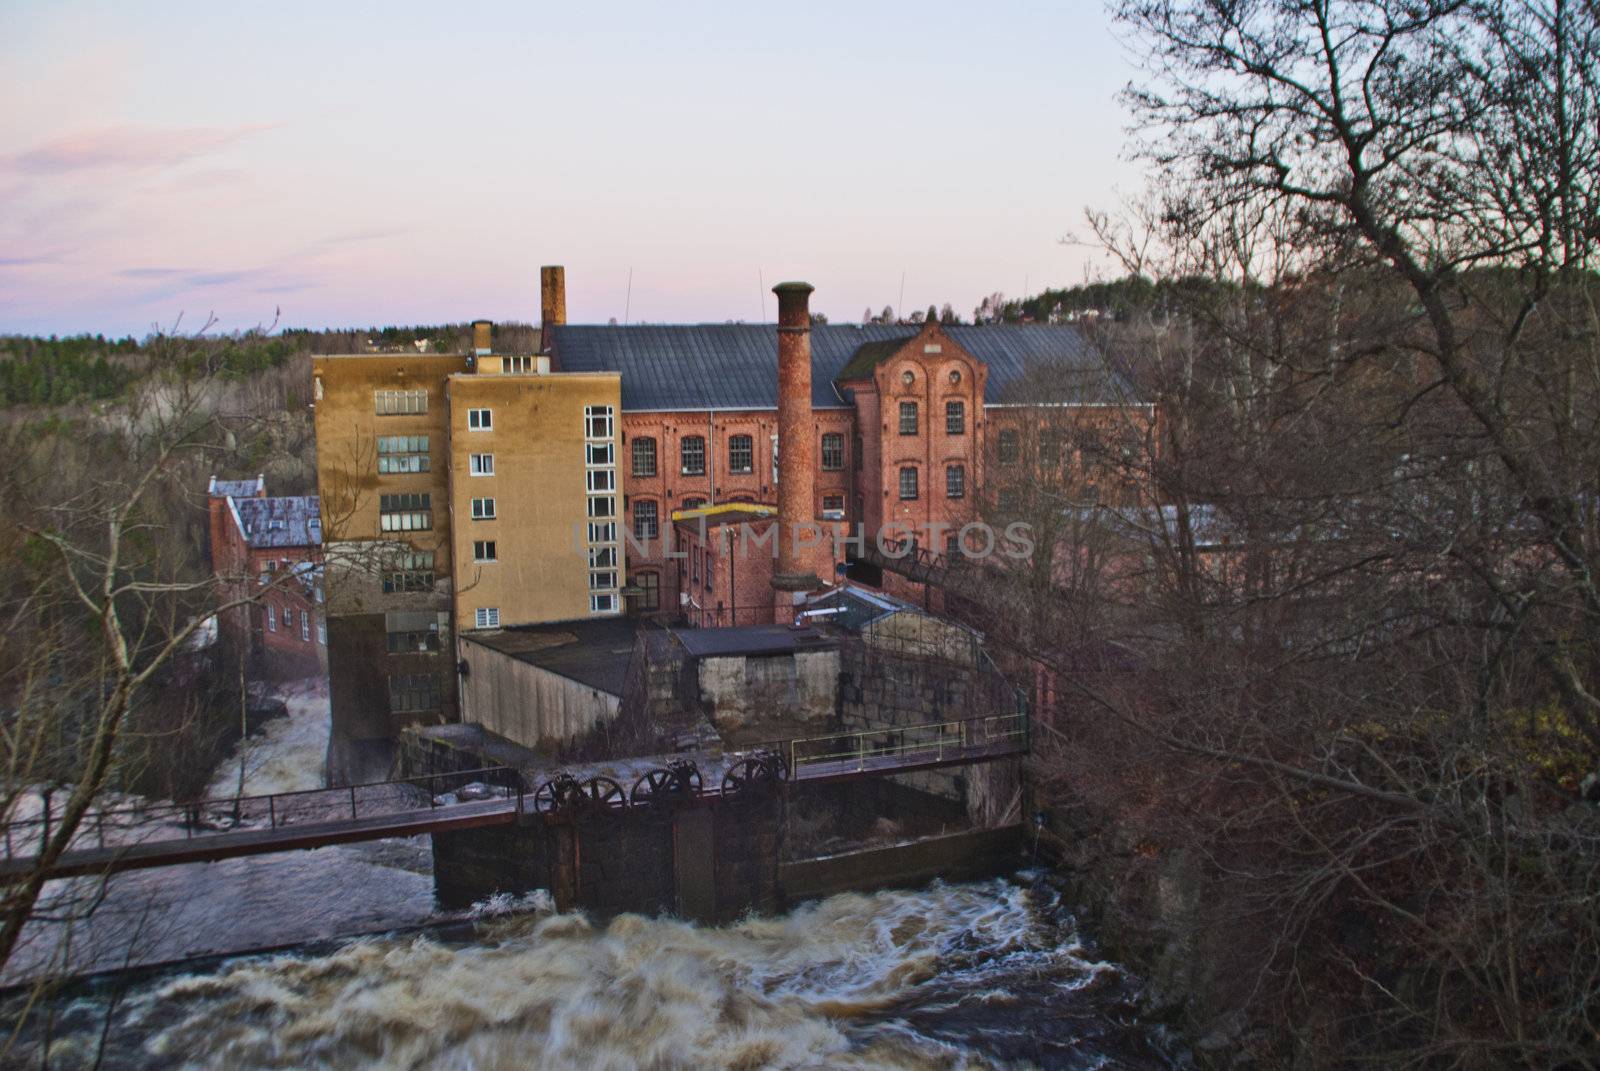 Halden cotton spinning mill in tistedalen, Halden  was established in 1813 as the first of its kind and represents the country's first industrial enterprise in the modern sense, the cotton spinning mill was discontinued in 1971, the picture are shot from Tistedalen in november 2012